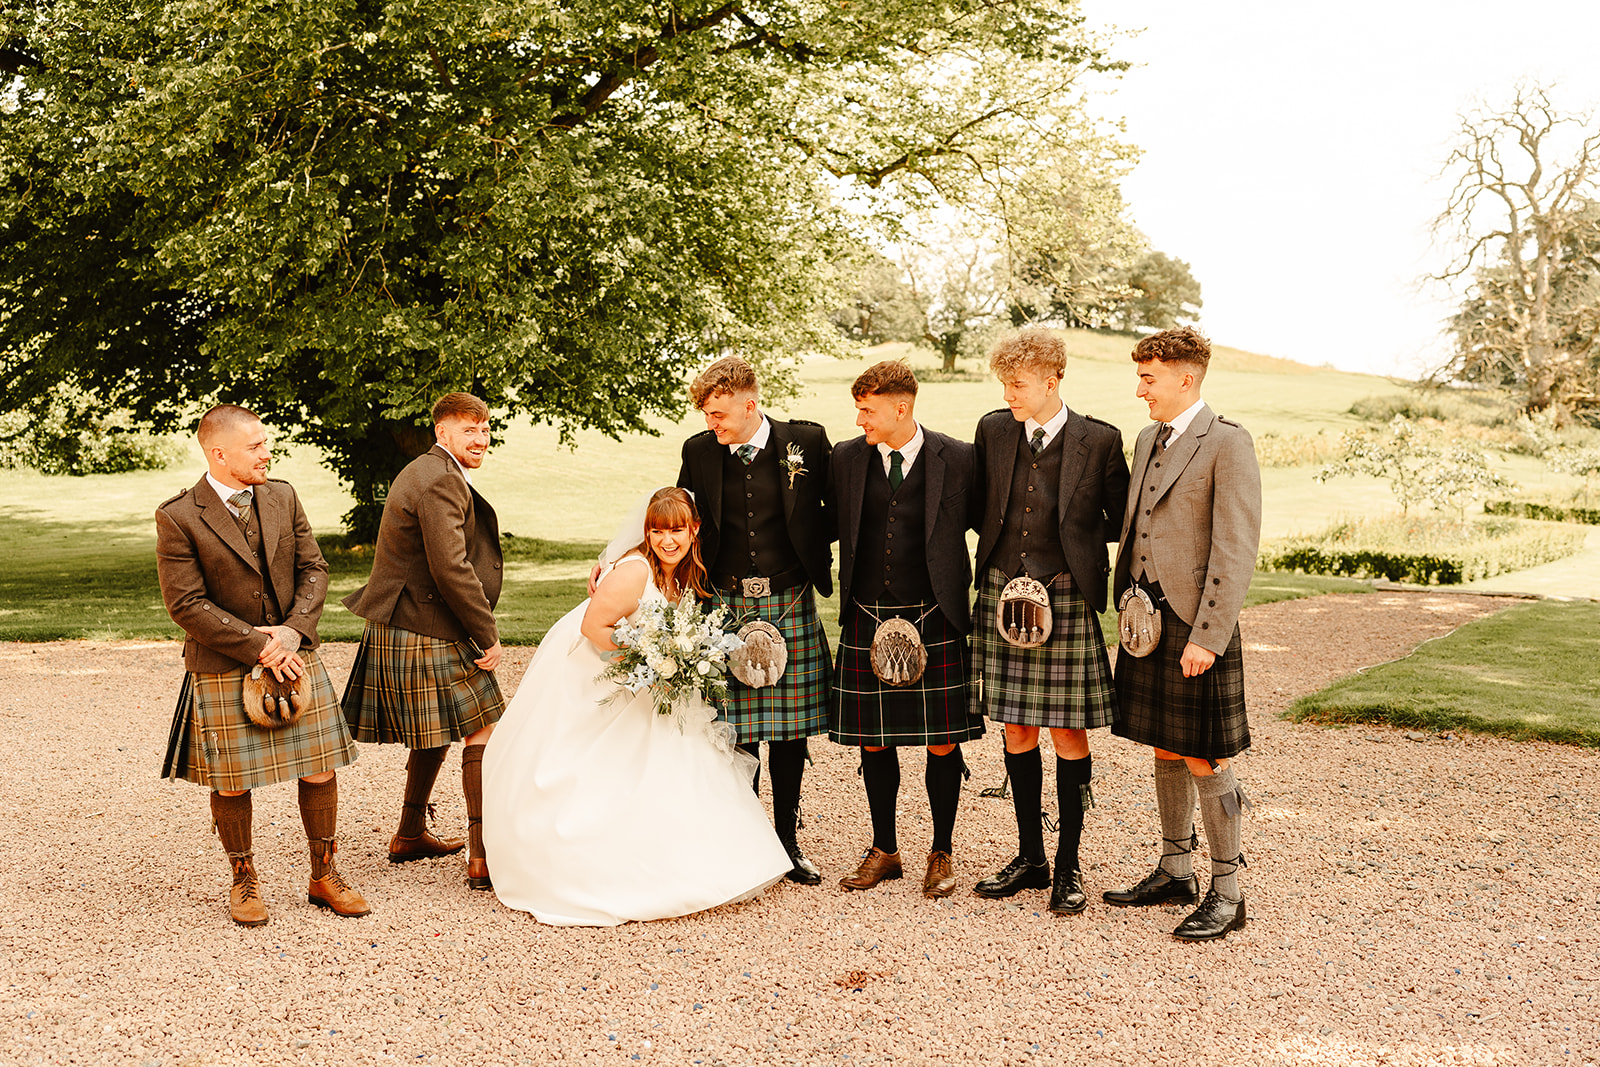 bride and groom pose with men in kilts whilst pulling silly poses with trees behind them